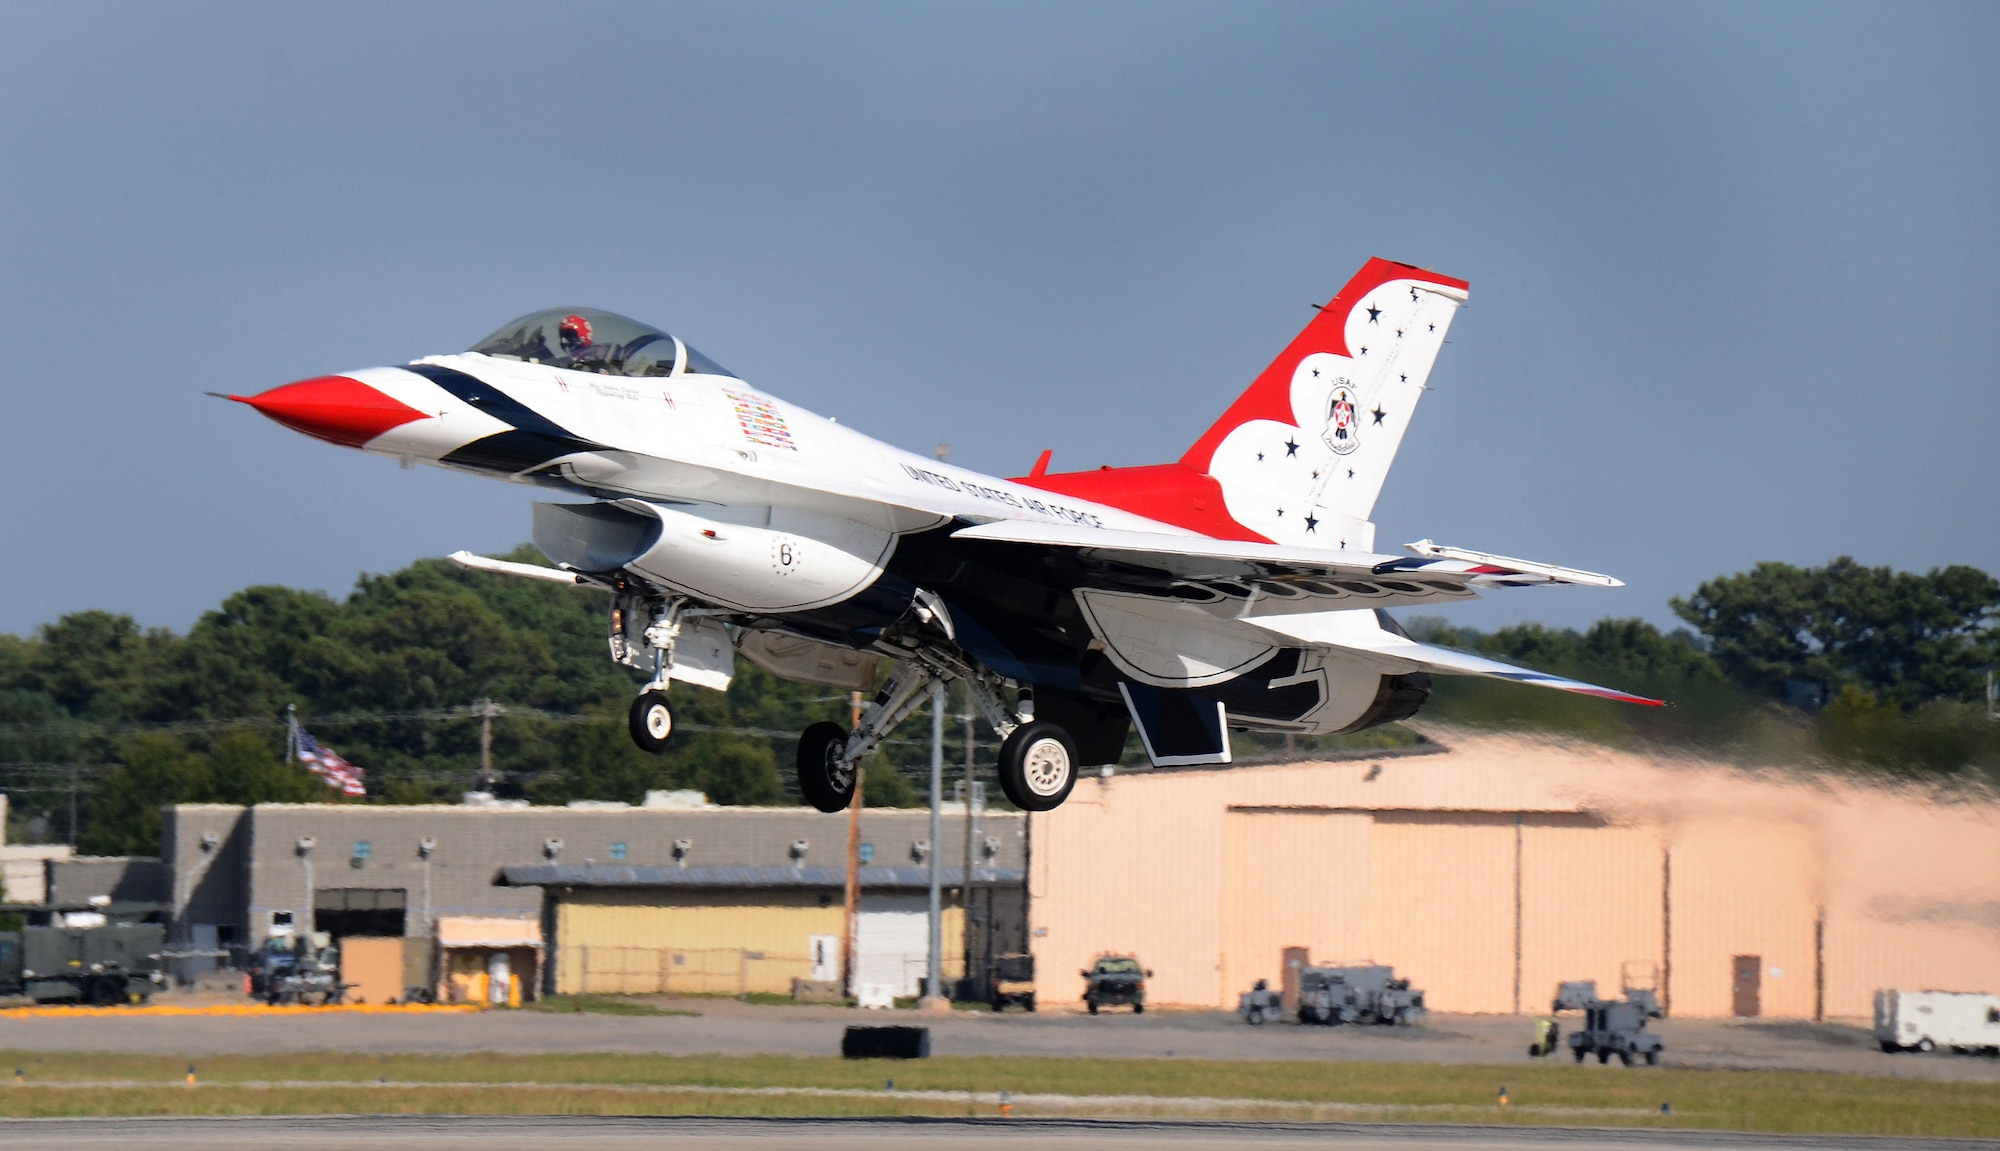 Thunderbird #6, Maj. Jason Curtis, flying opposing solo, departs Dobbins Air Reserve Base for the Wings Over North Georgia air show Oct. 18, 2014. The USAF Air Demonstration Squadron Thunderbirds are using Dobbins as their base of operations for their performances at the air show this weekend at the Russell Regional Airport in Rome, Georgia. (U.S. Air Force photo/ Brad Fallin/Released)